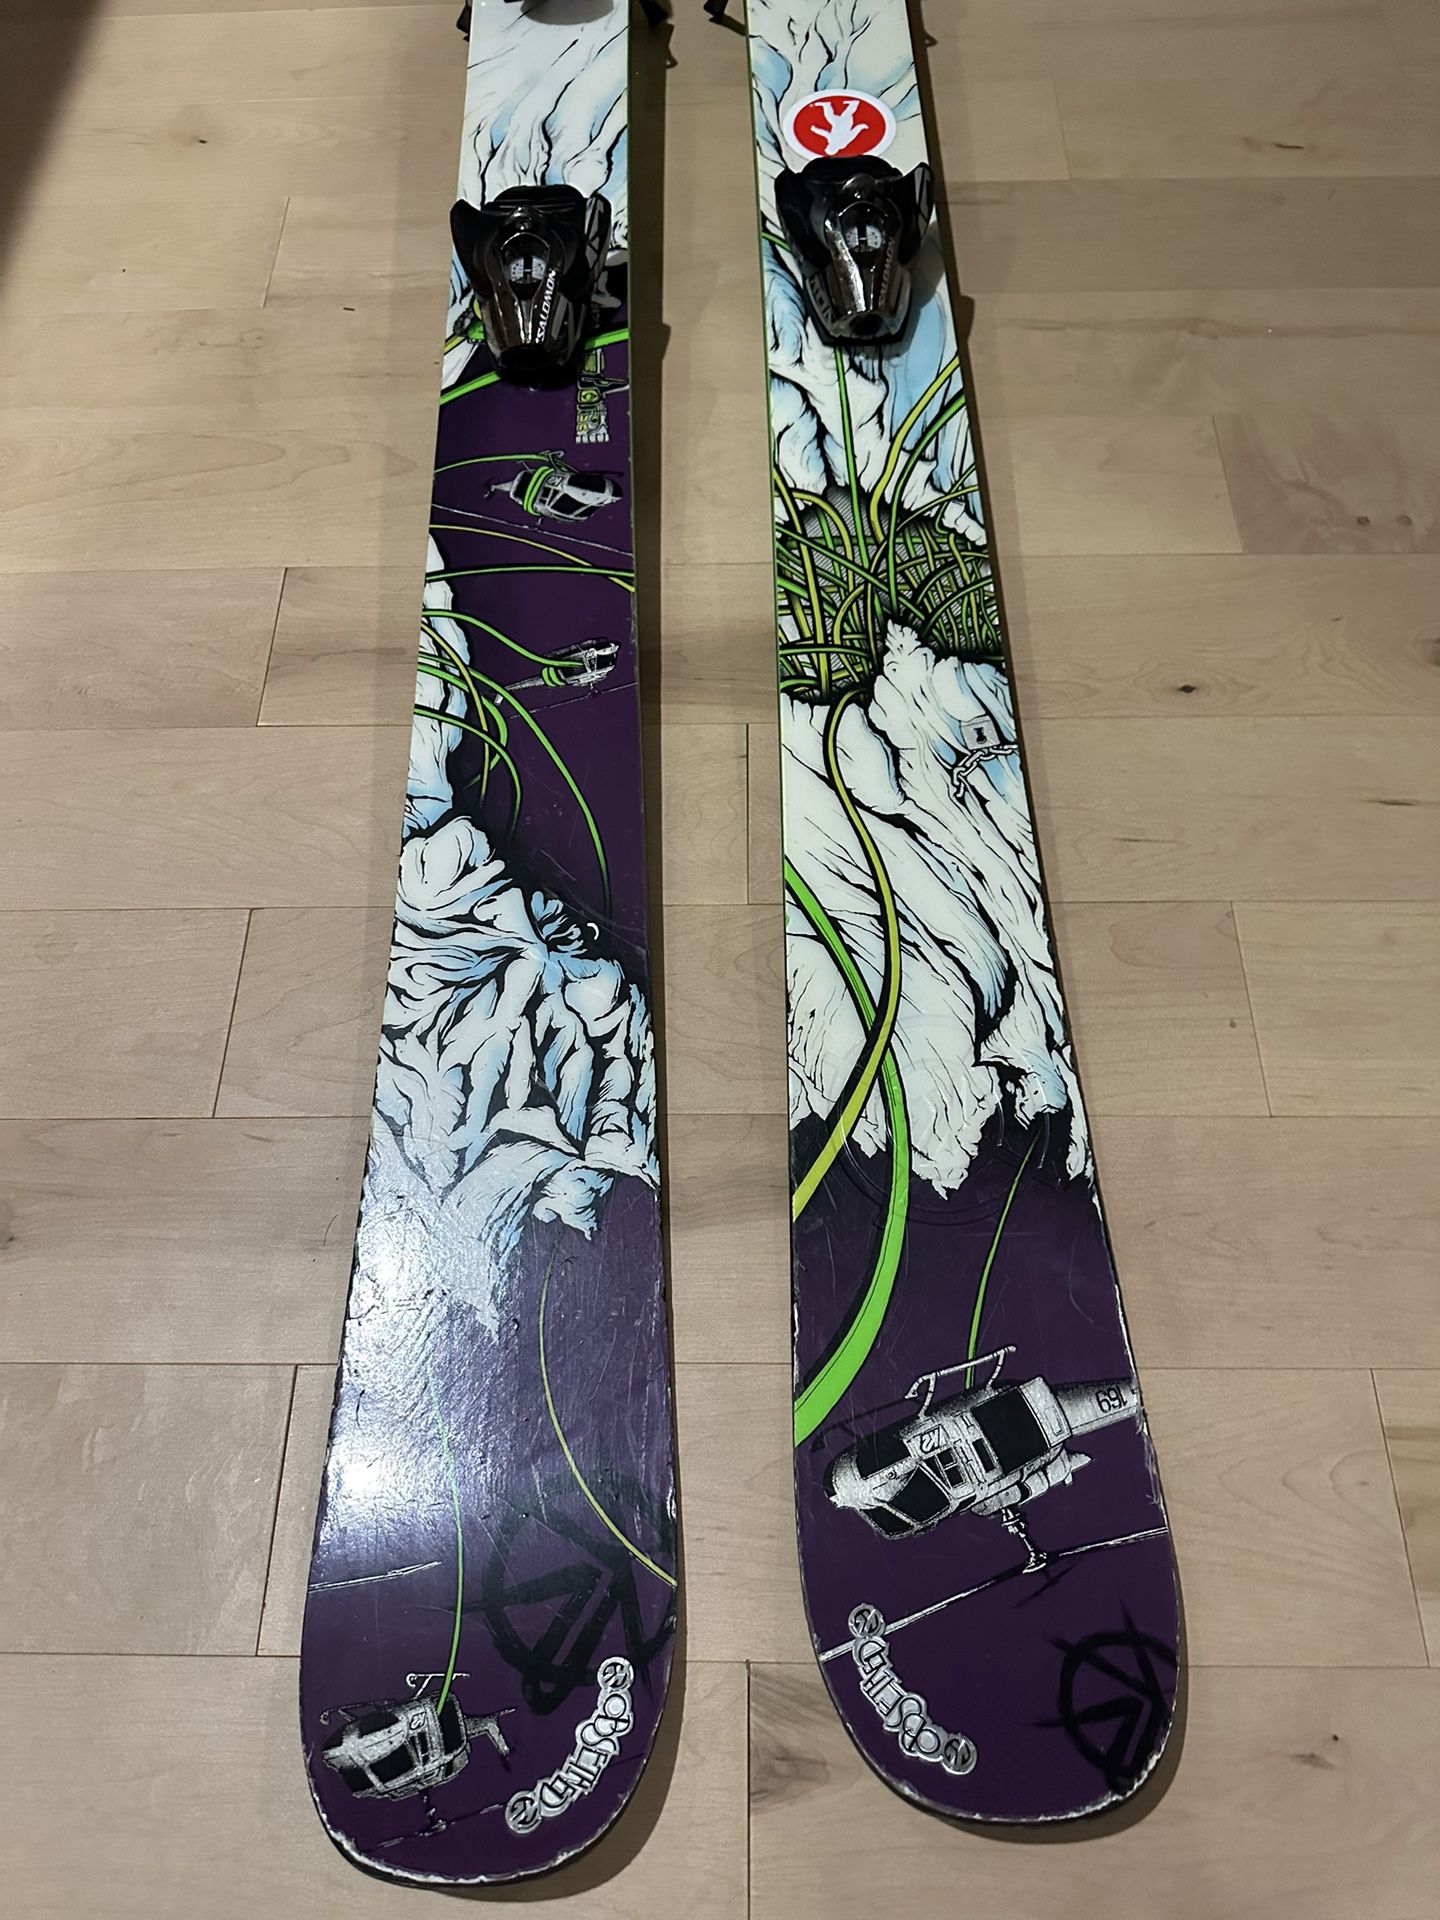 K2 obsethed skis - Twin Tip - 169